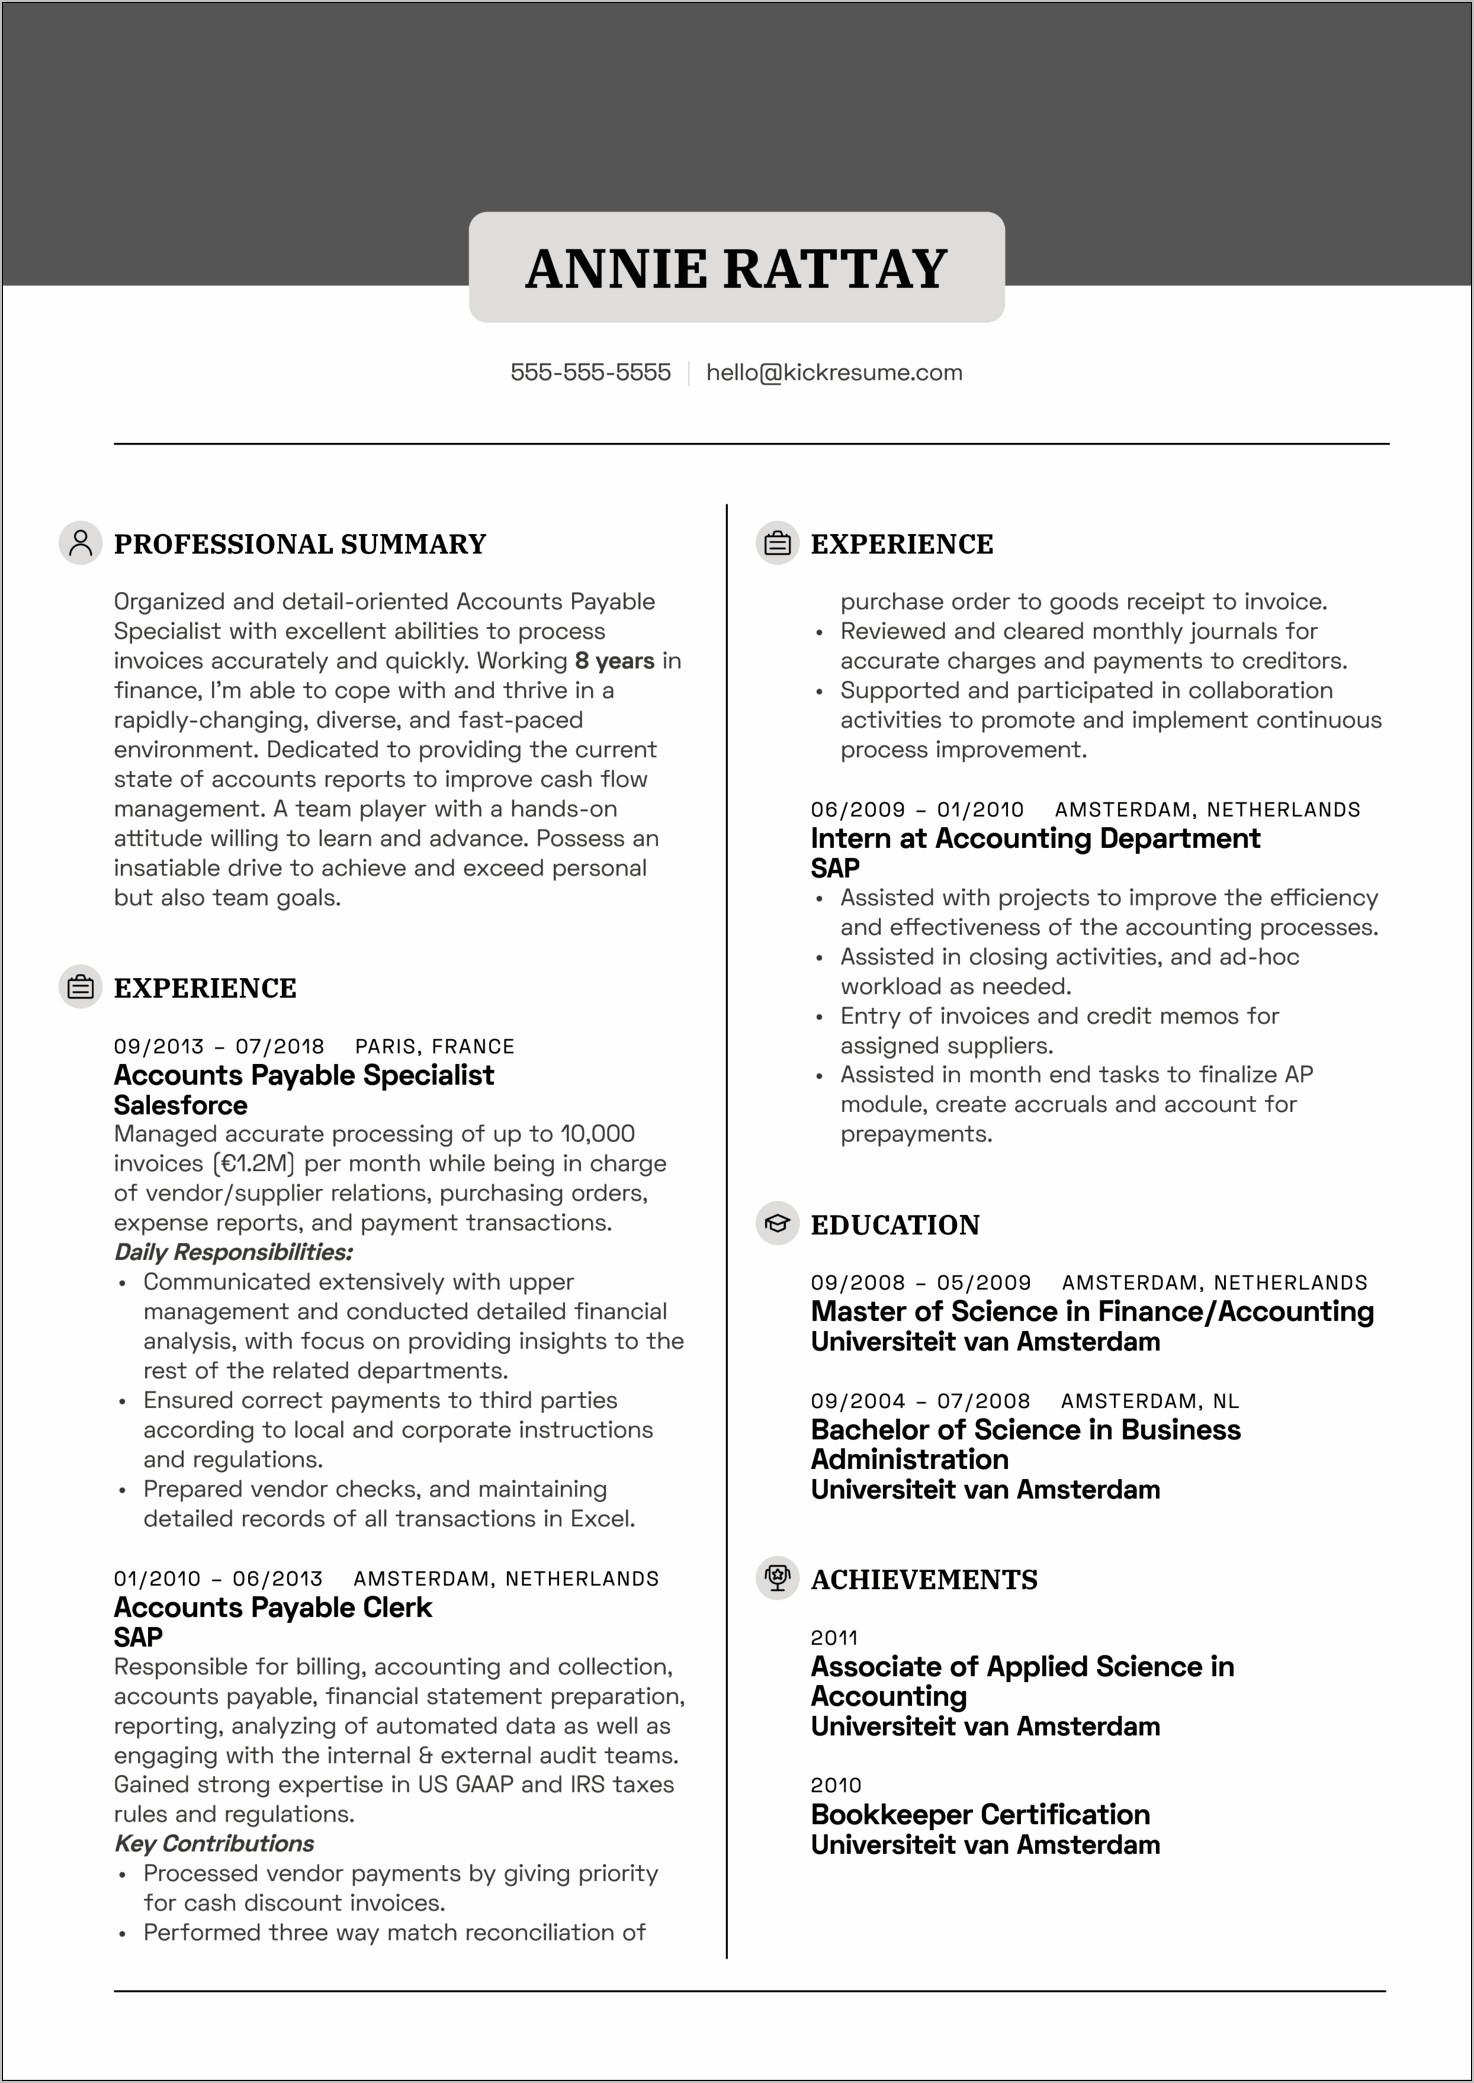 Resume Objective Statement Examples Accounts Payable